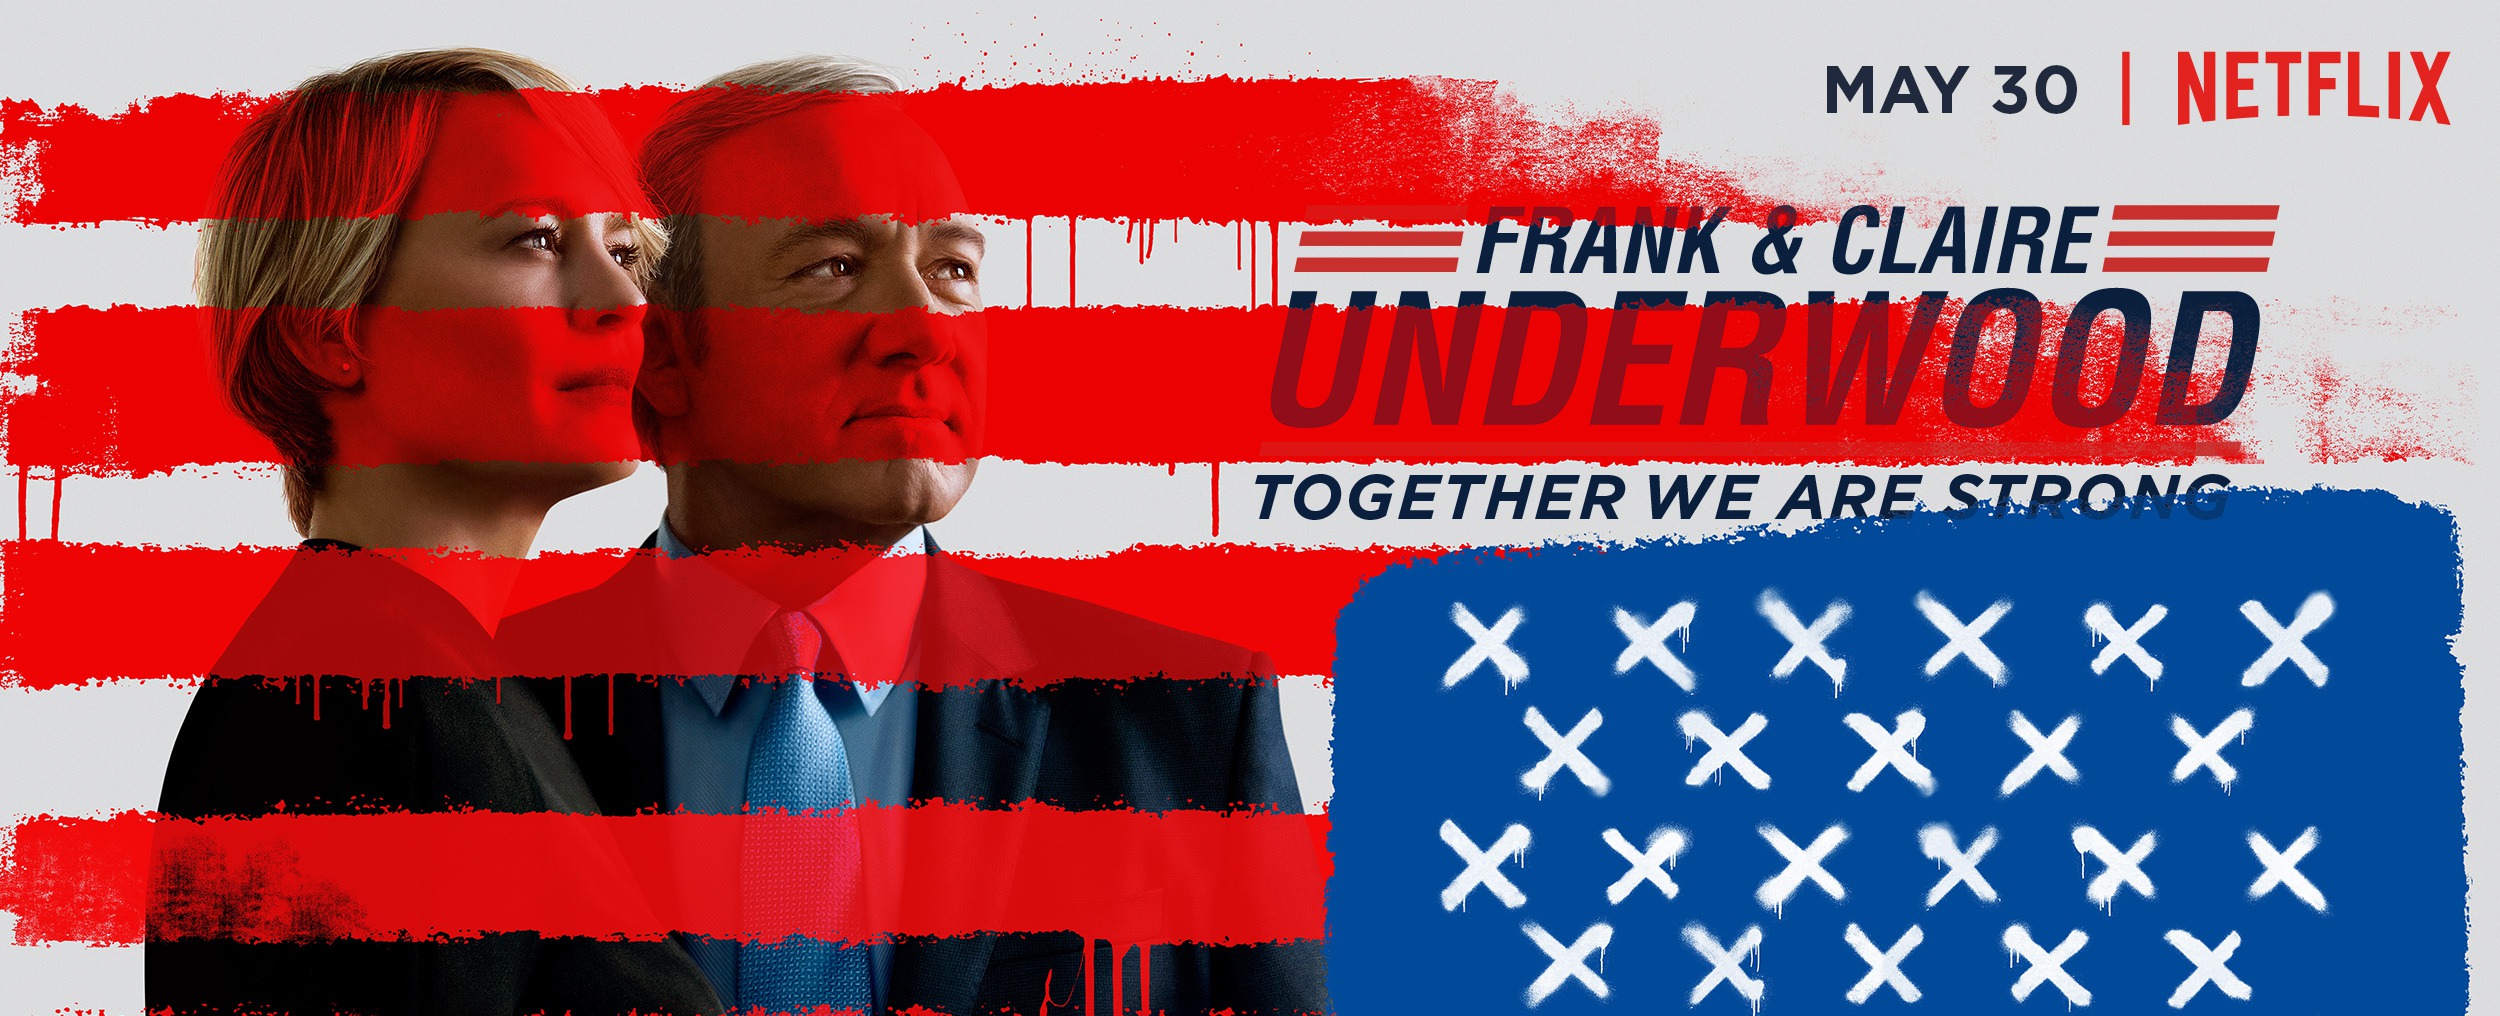 Mega Sized TV Poster Image for House of Cards (#9 of 10)